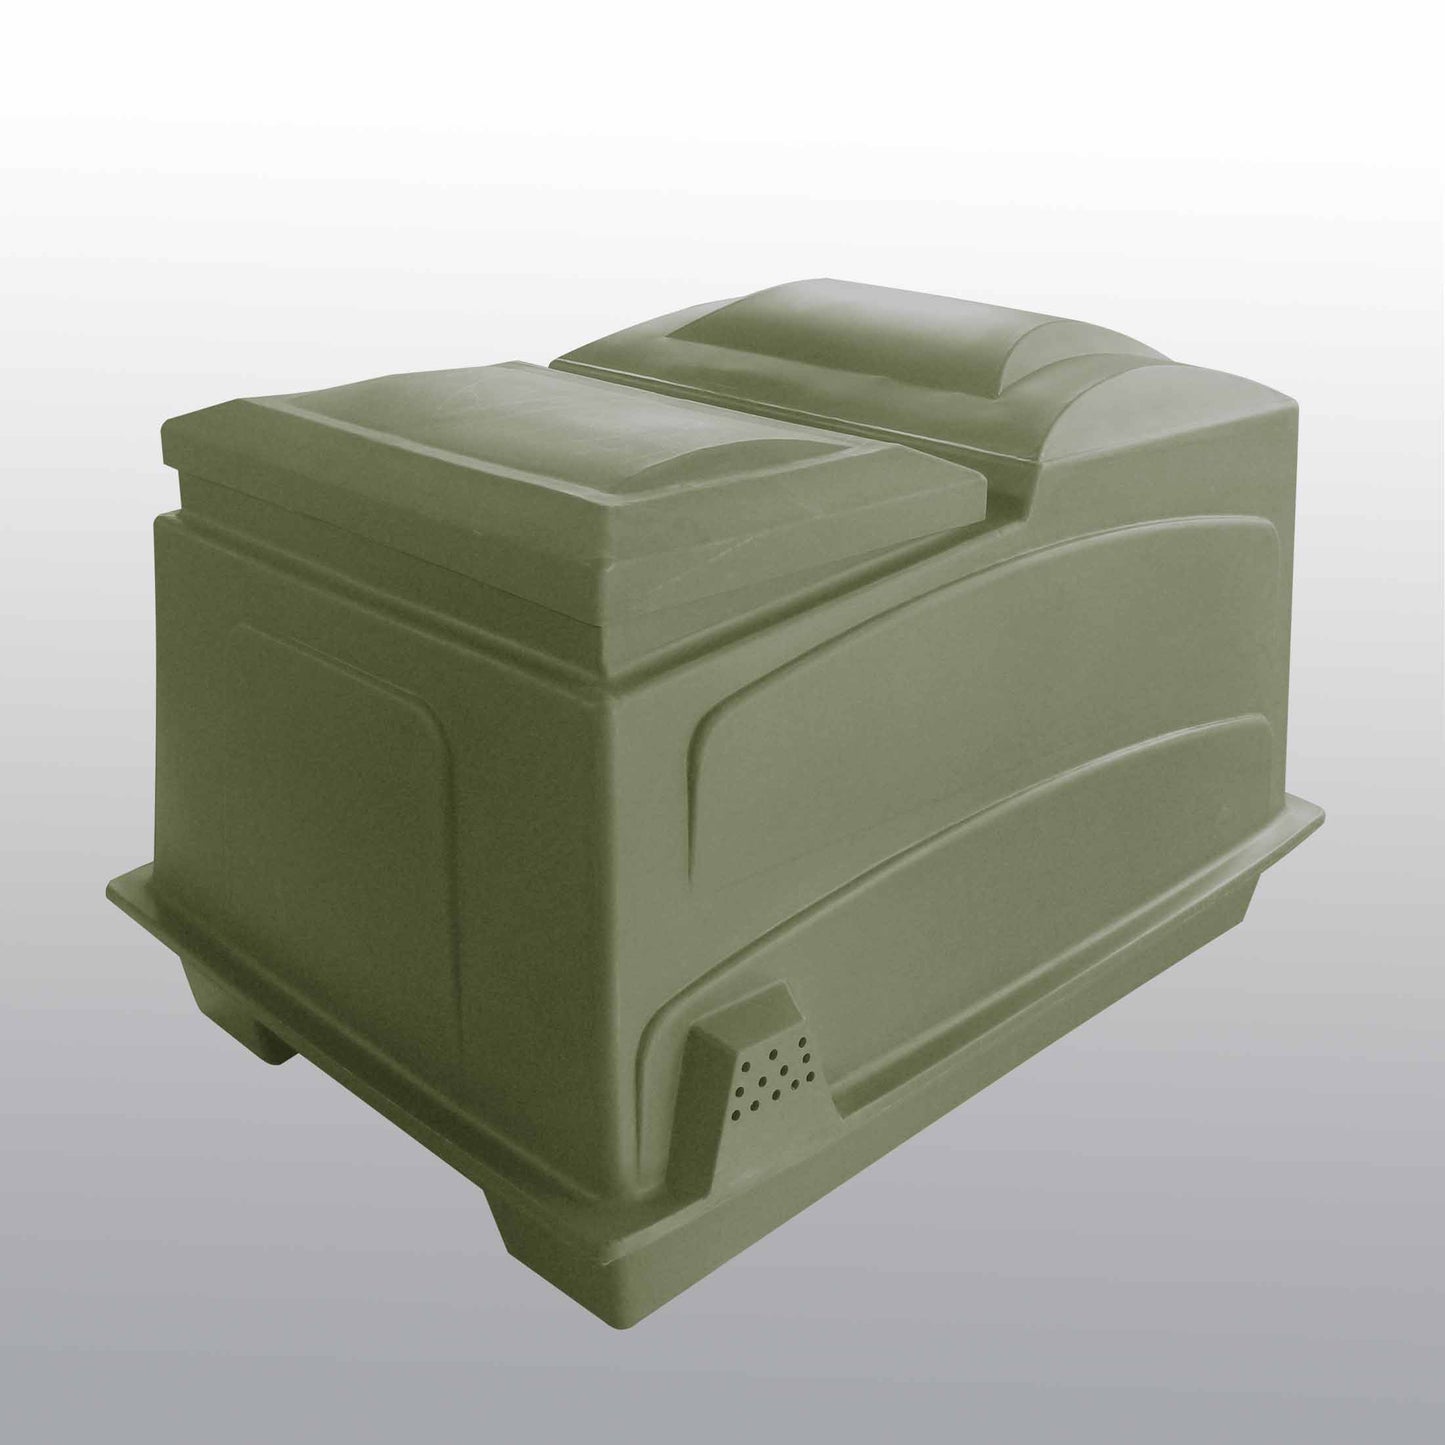 2 in 1 Combi Filter Box With Base - Green